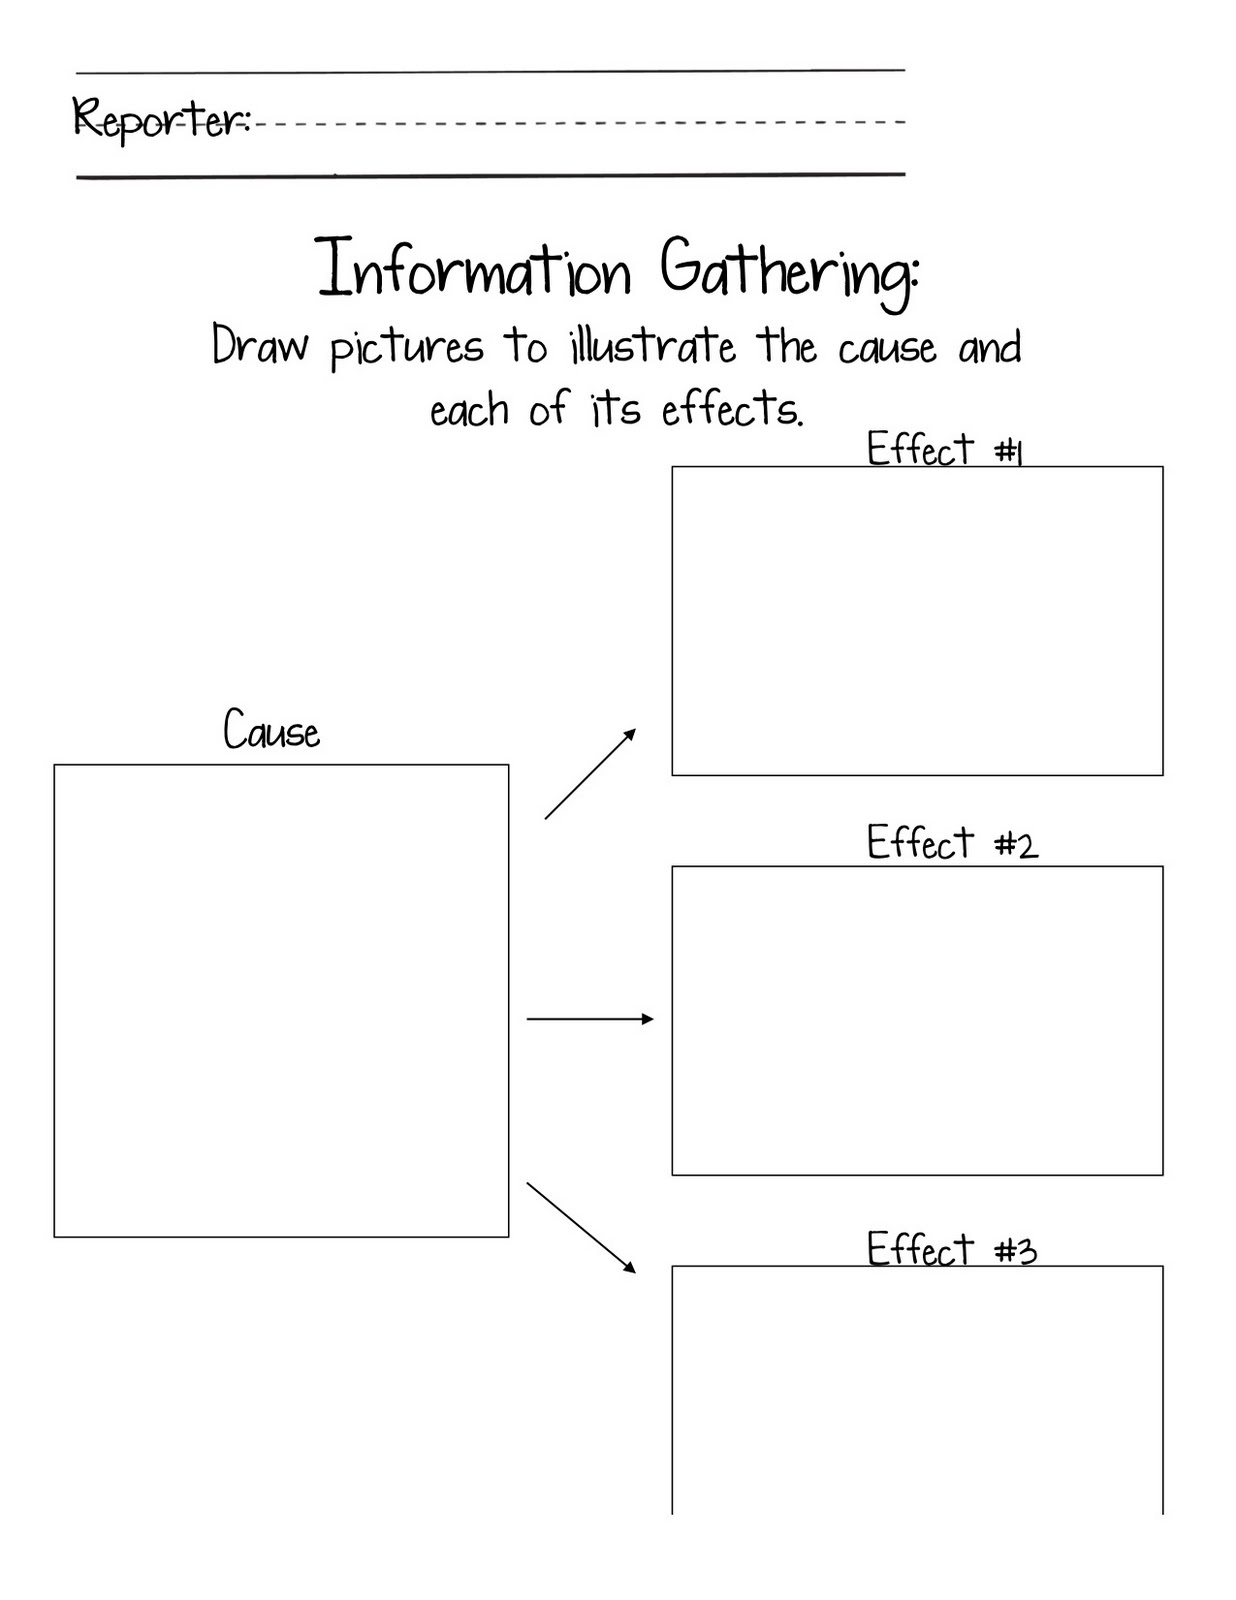 Statistical research paper graphic organizer elementary